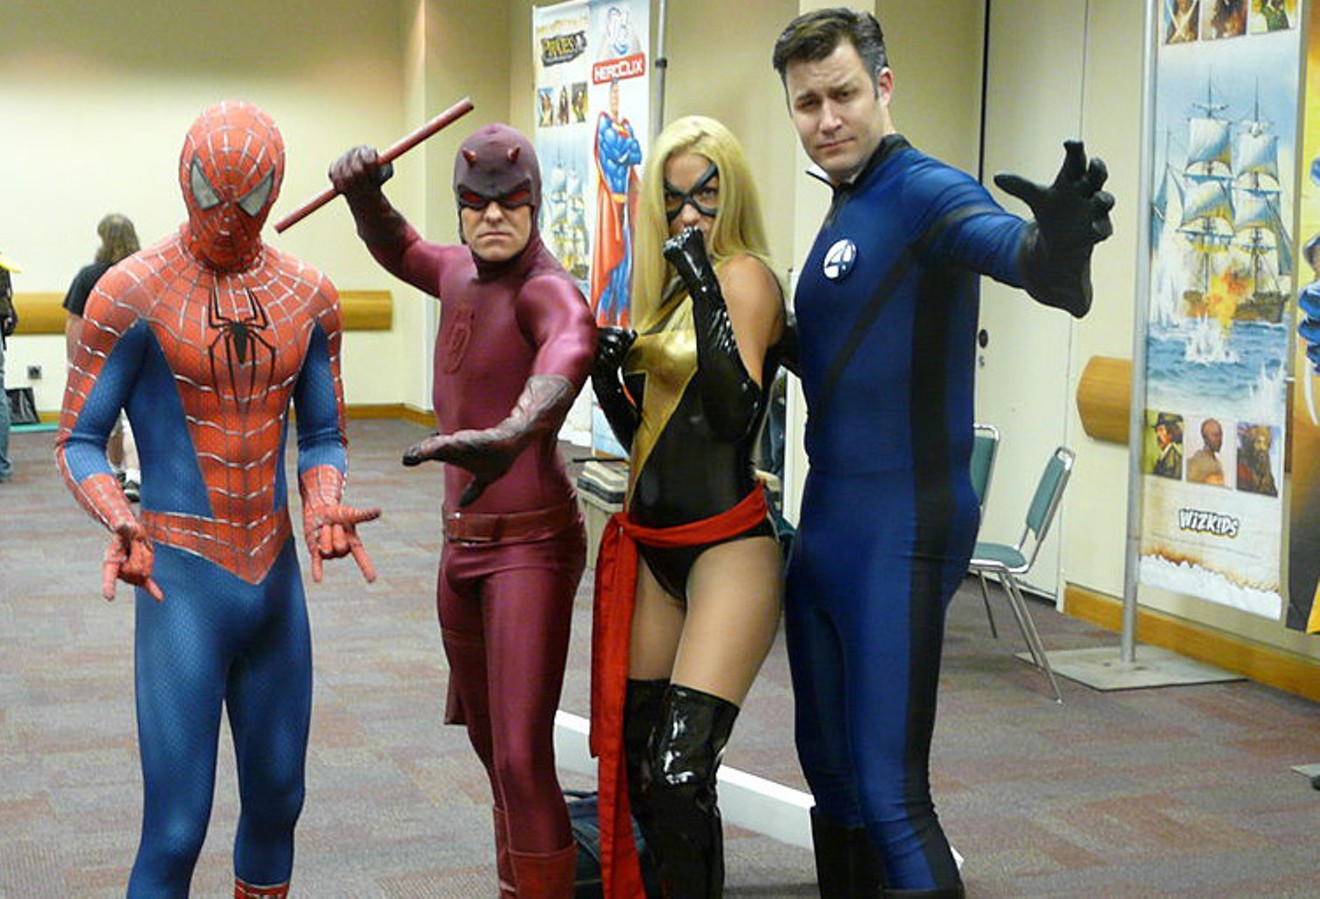 As comic book fandom and conventions have gone mainstream, it's no surprise that Cosplayers - likes these Marvel fans in Indianapolis at GenCon - often come as Marvel and DC characters. But the rival companies have waged their own half-century battle for dominance.